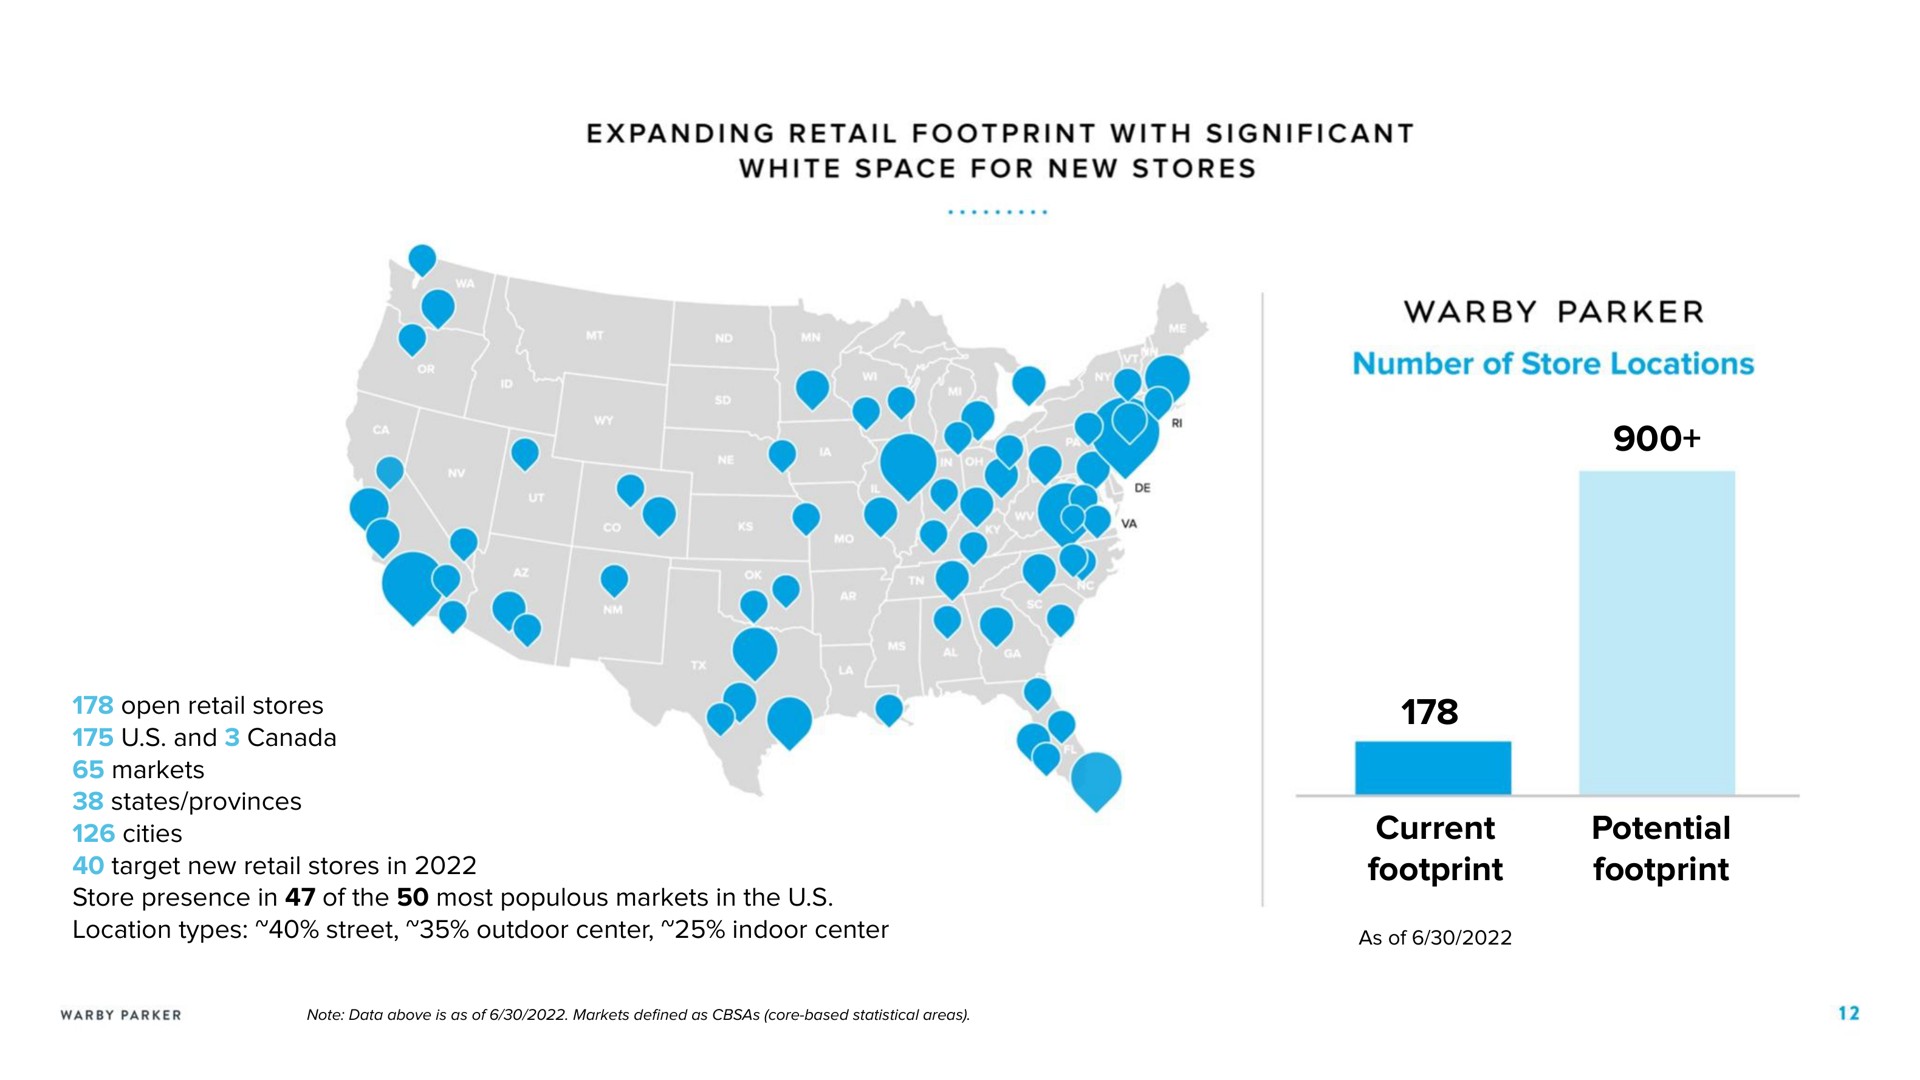 current footprint potential footprint expanding retail with significant white space for new stores open retail stores and canada markets states provinces cities target new retail store presence in of the most populous markets in the location types street outdoor center indoor center stores in parker number of store locations as of | Warby Parker